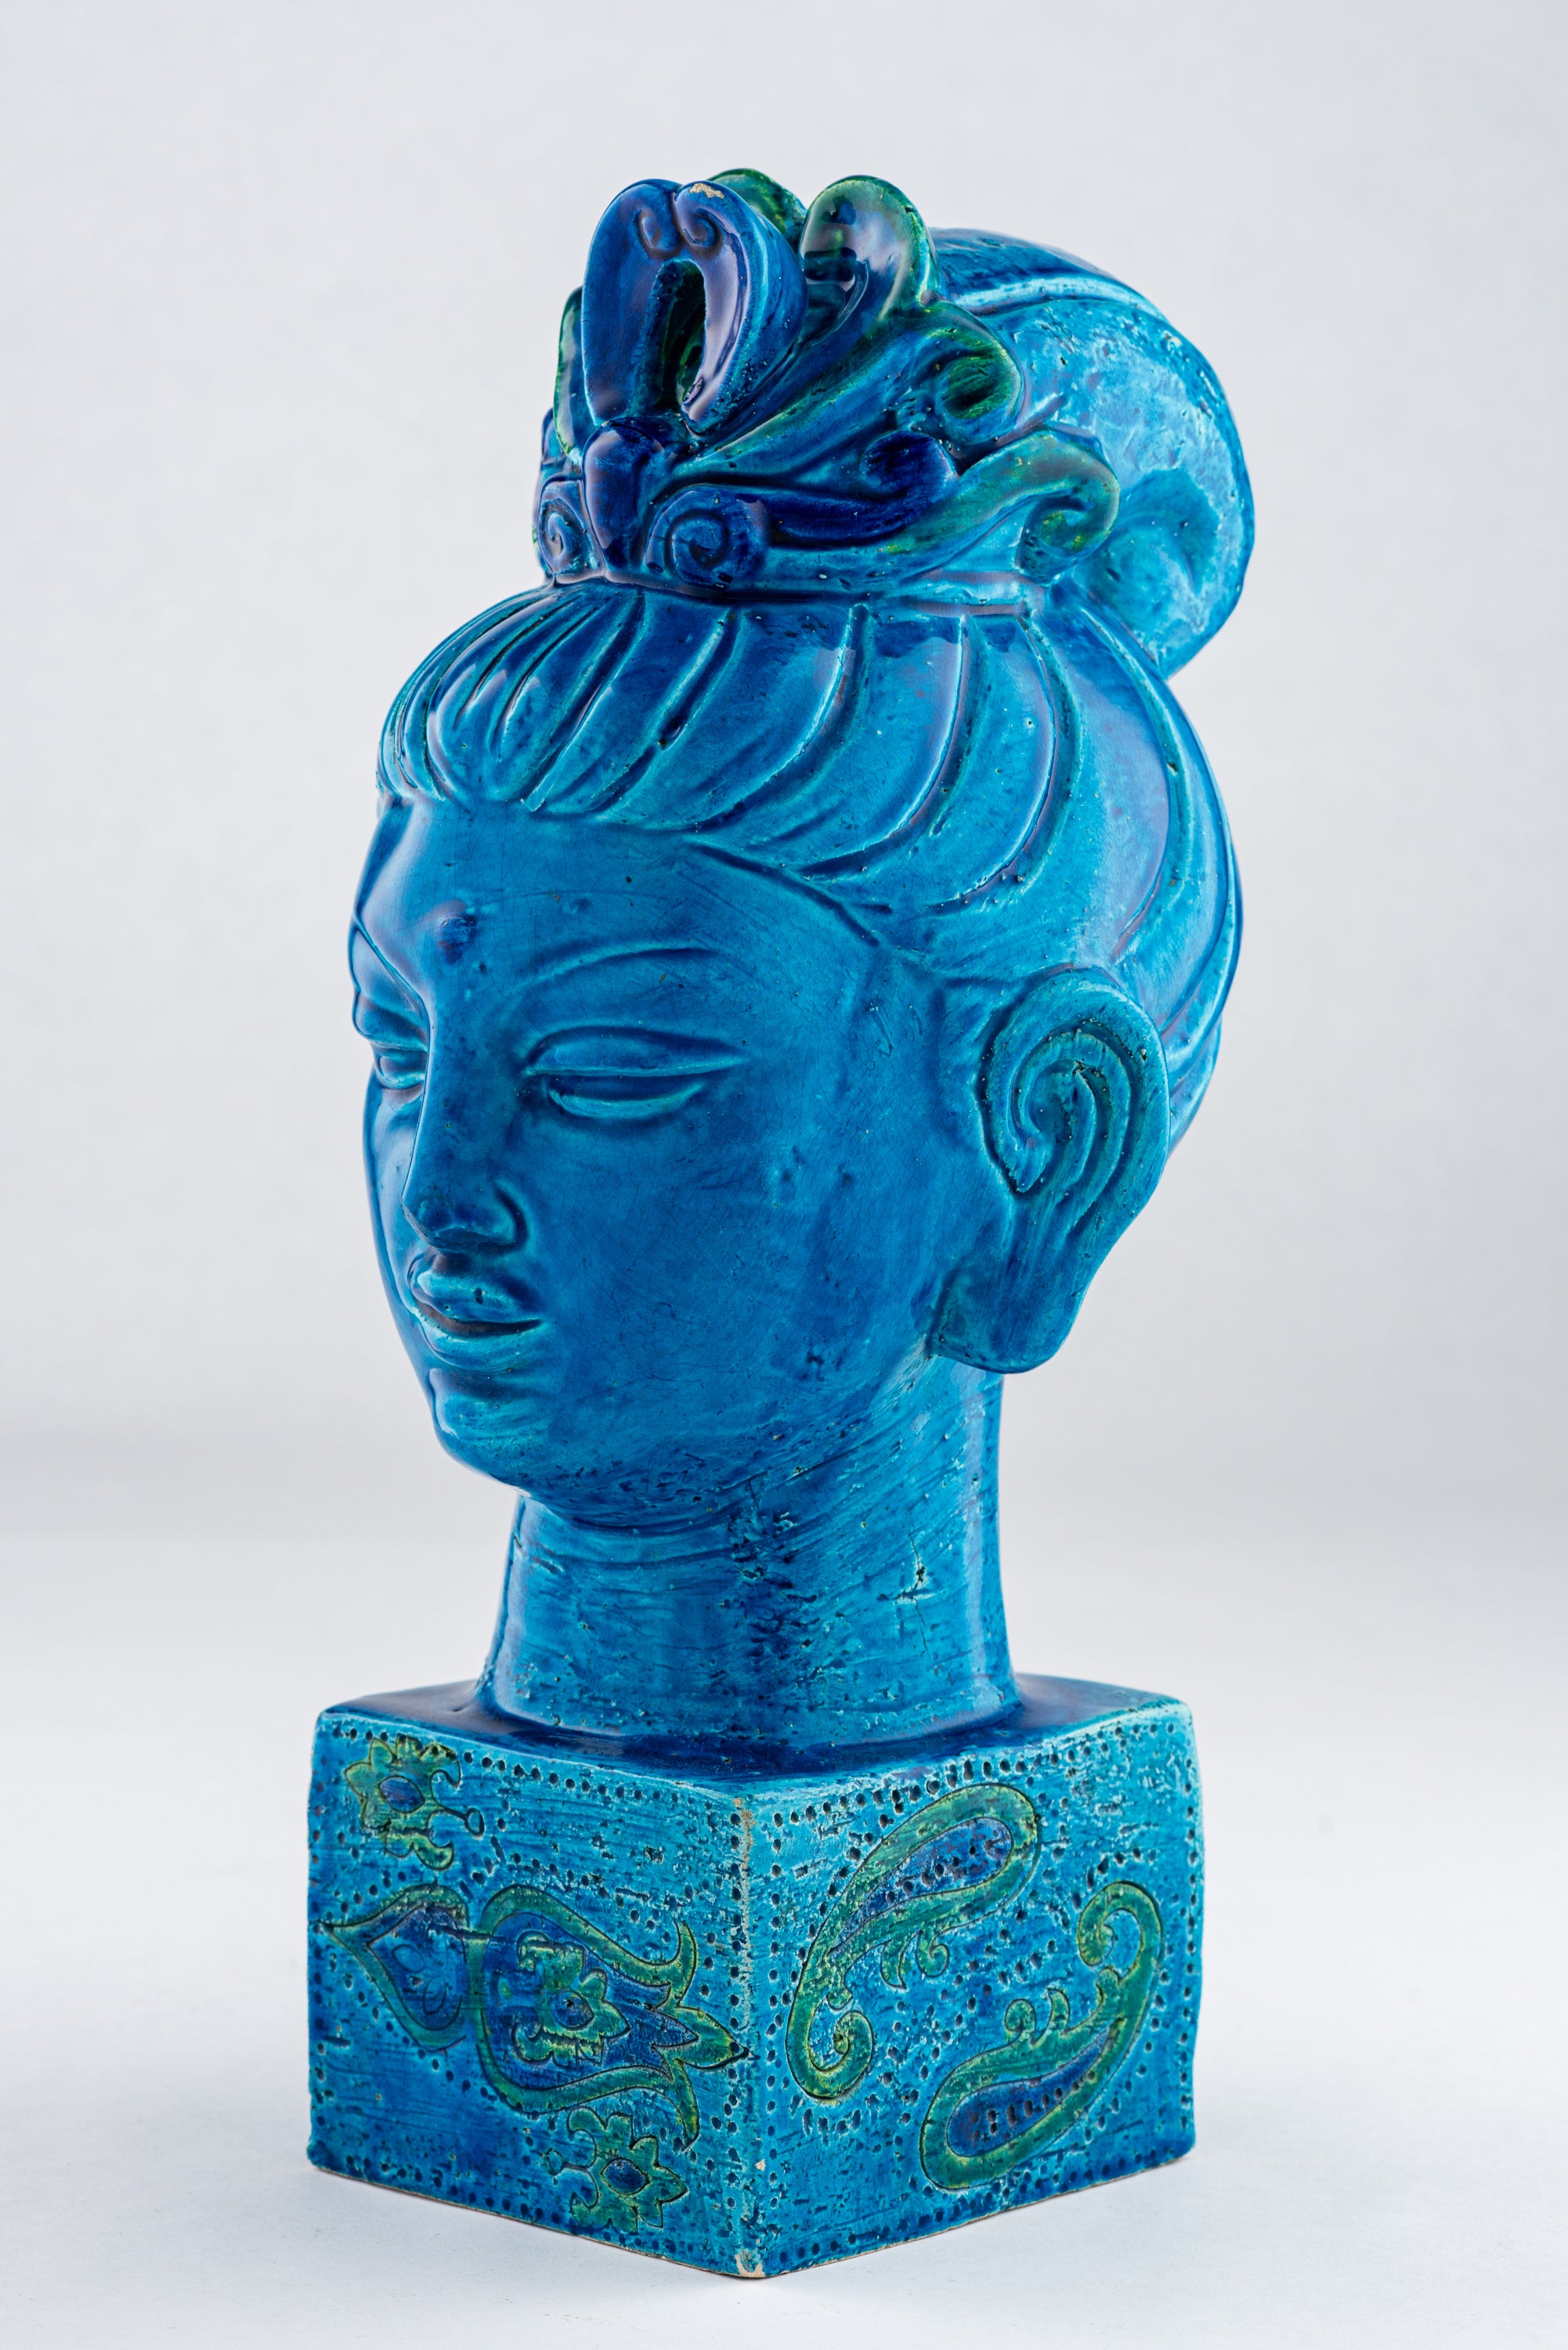 Bitossi Kwan Yin Buddha Bank, Ceramic, Blue Paisley, Signed. A beautiful and calming female Buddha glazed in a royal blue, with a hint of green in her hair, and having a square base decorated with psychedelic 60's abstract paisley embellishments.